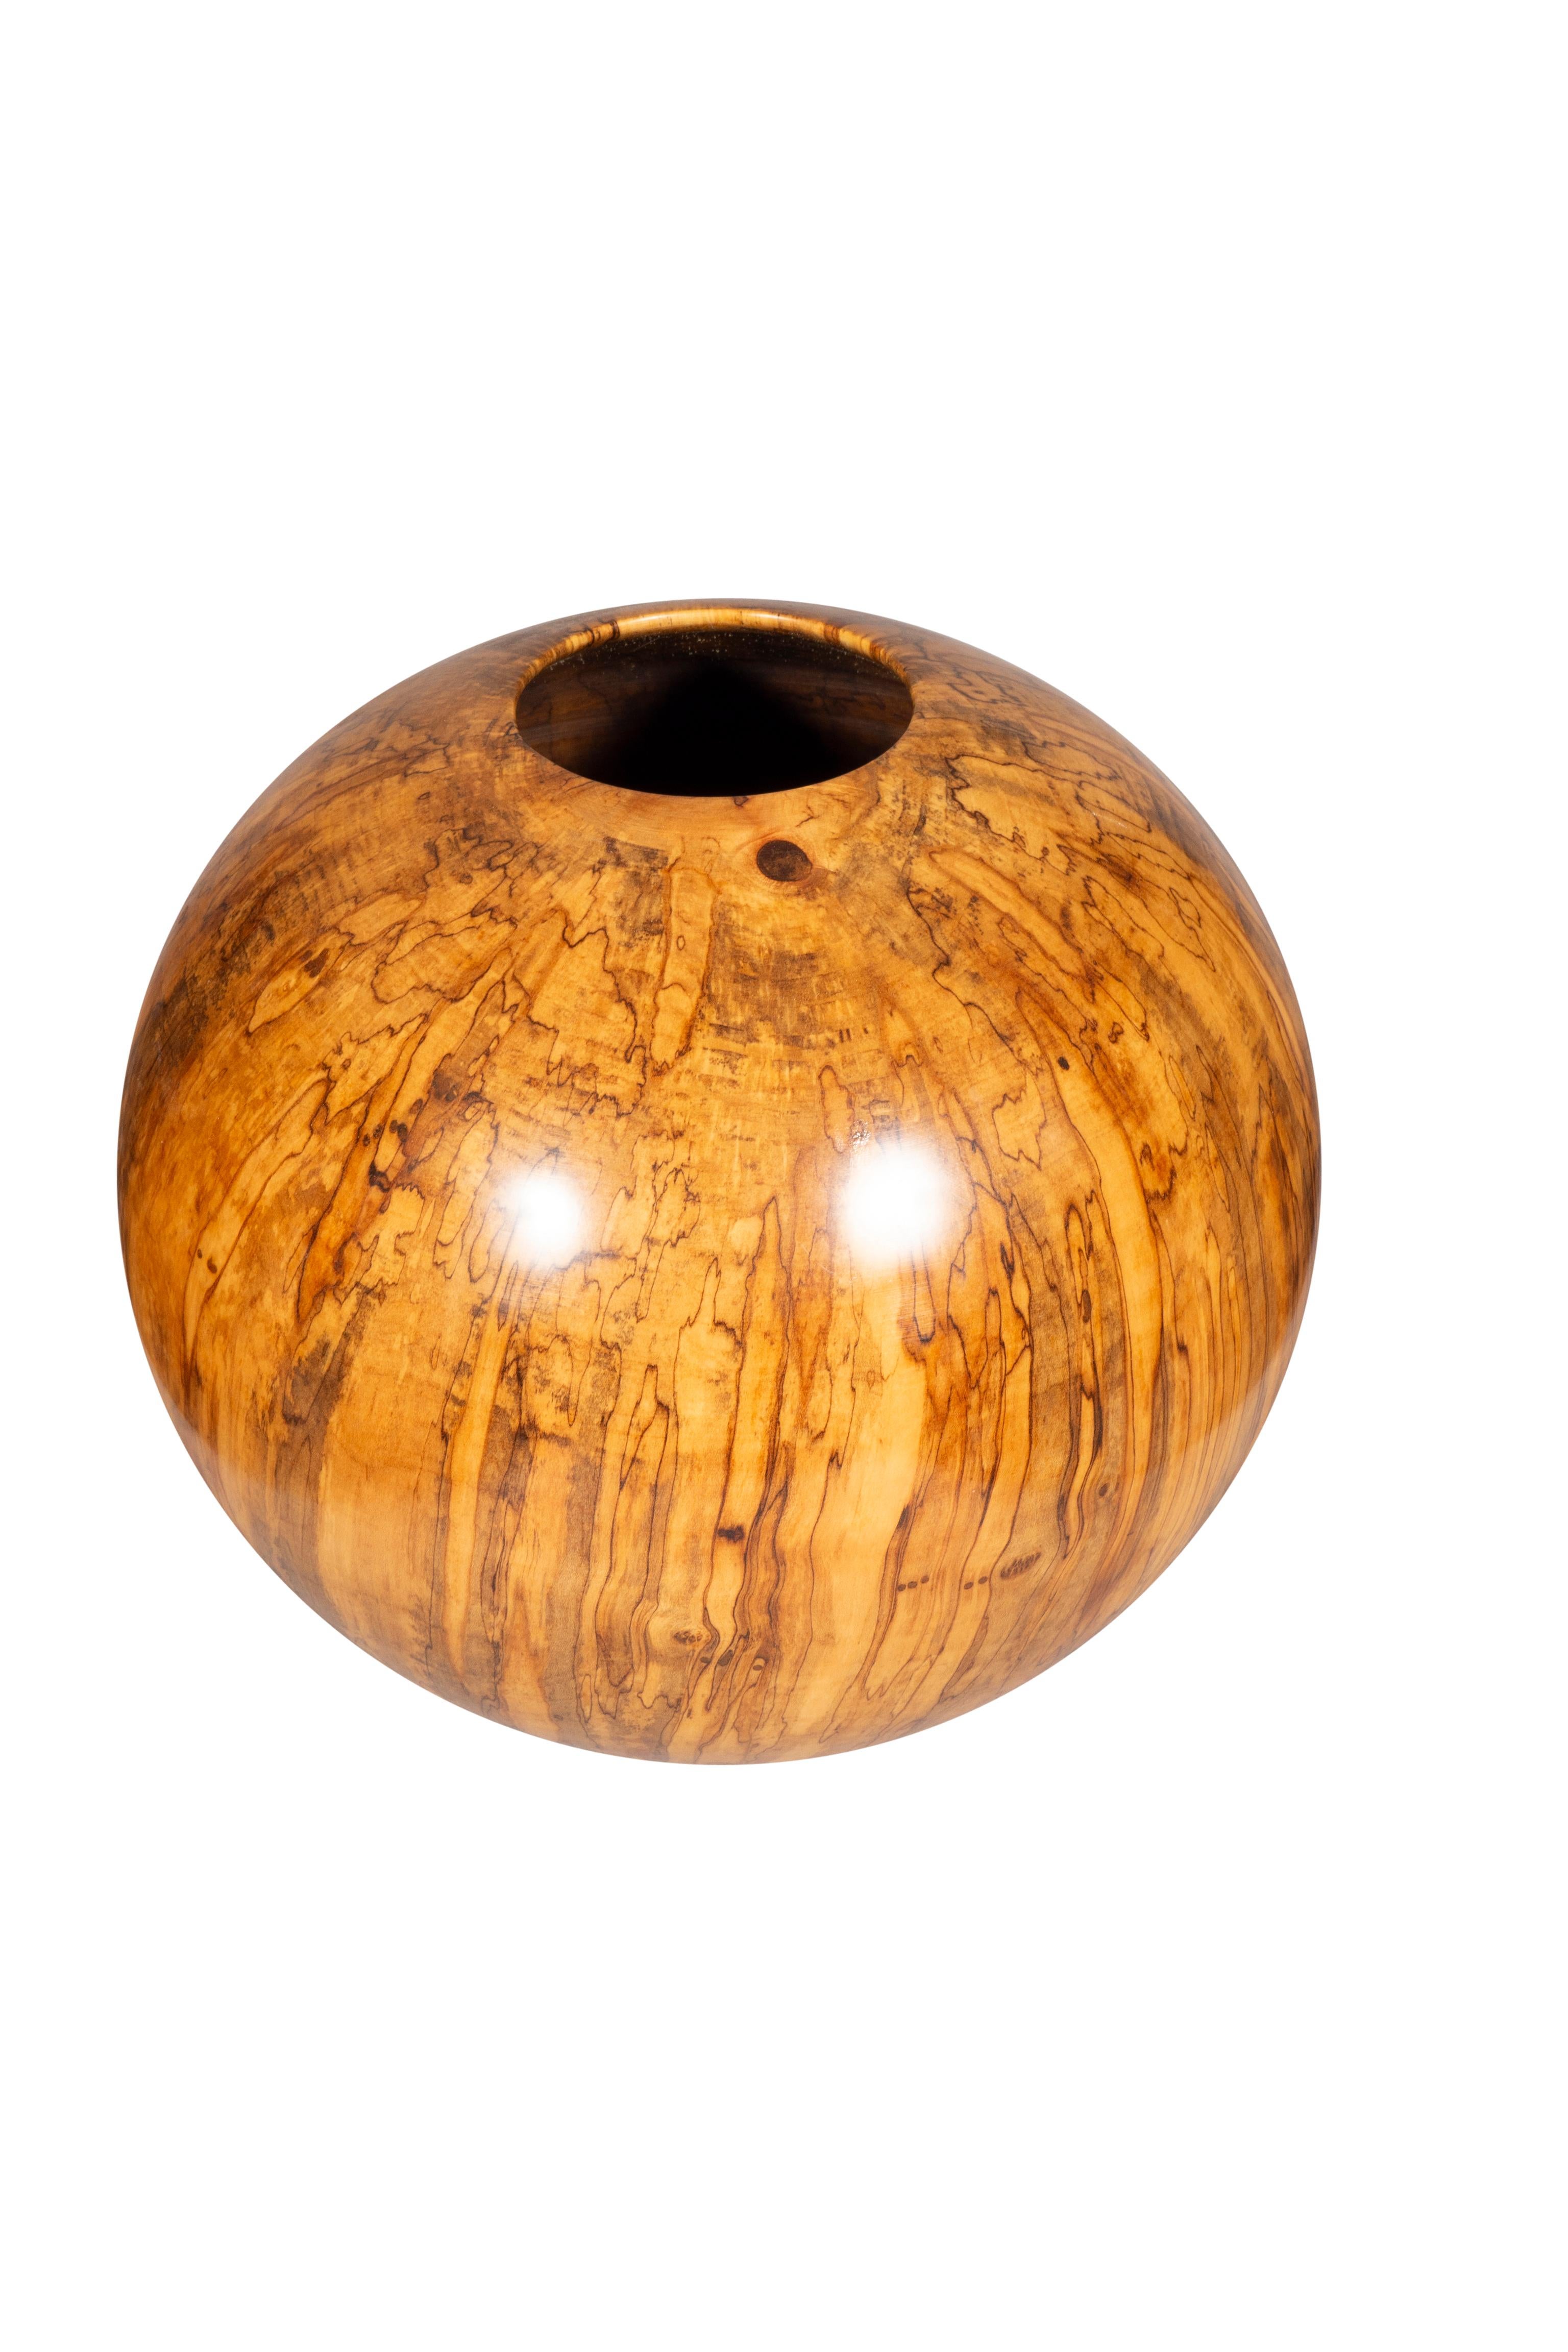 Philip Moulthrop Spalted Silver Maple Vase In Good Condition For Sale In Essex, MA